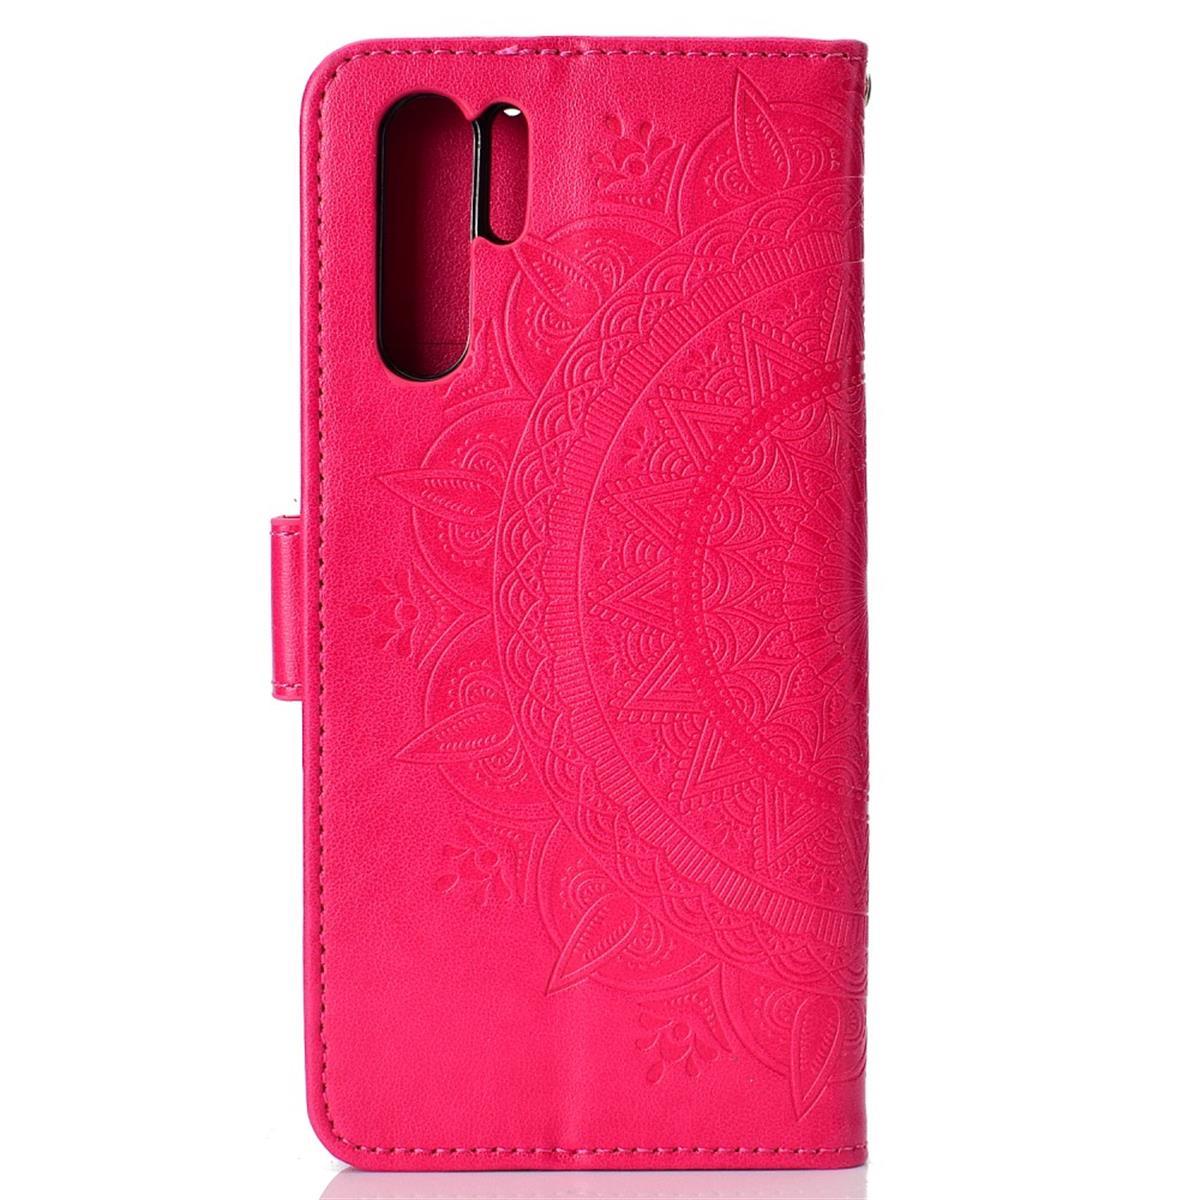 COVERKINGZ Klapphülle P30 mit Bookcover, Pro, Pink Huawei, Mandala Muster